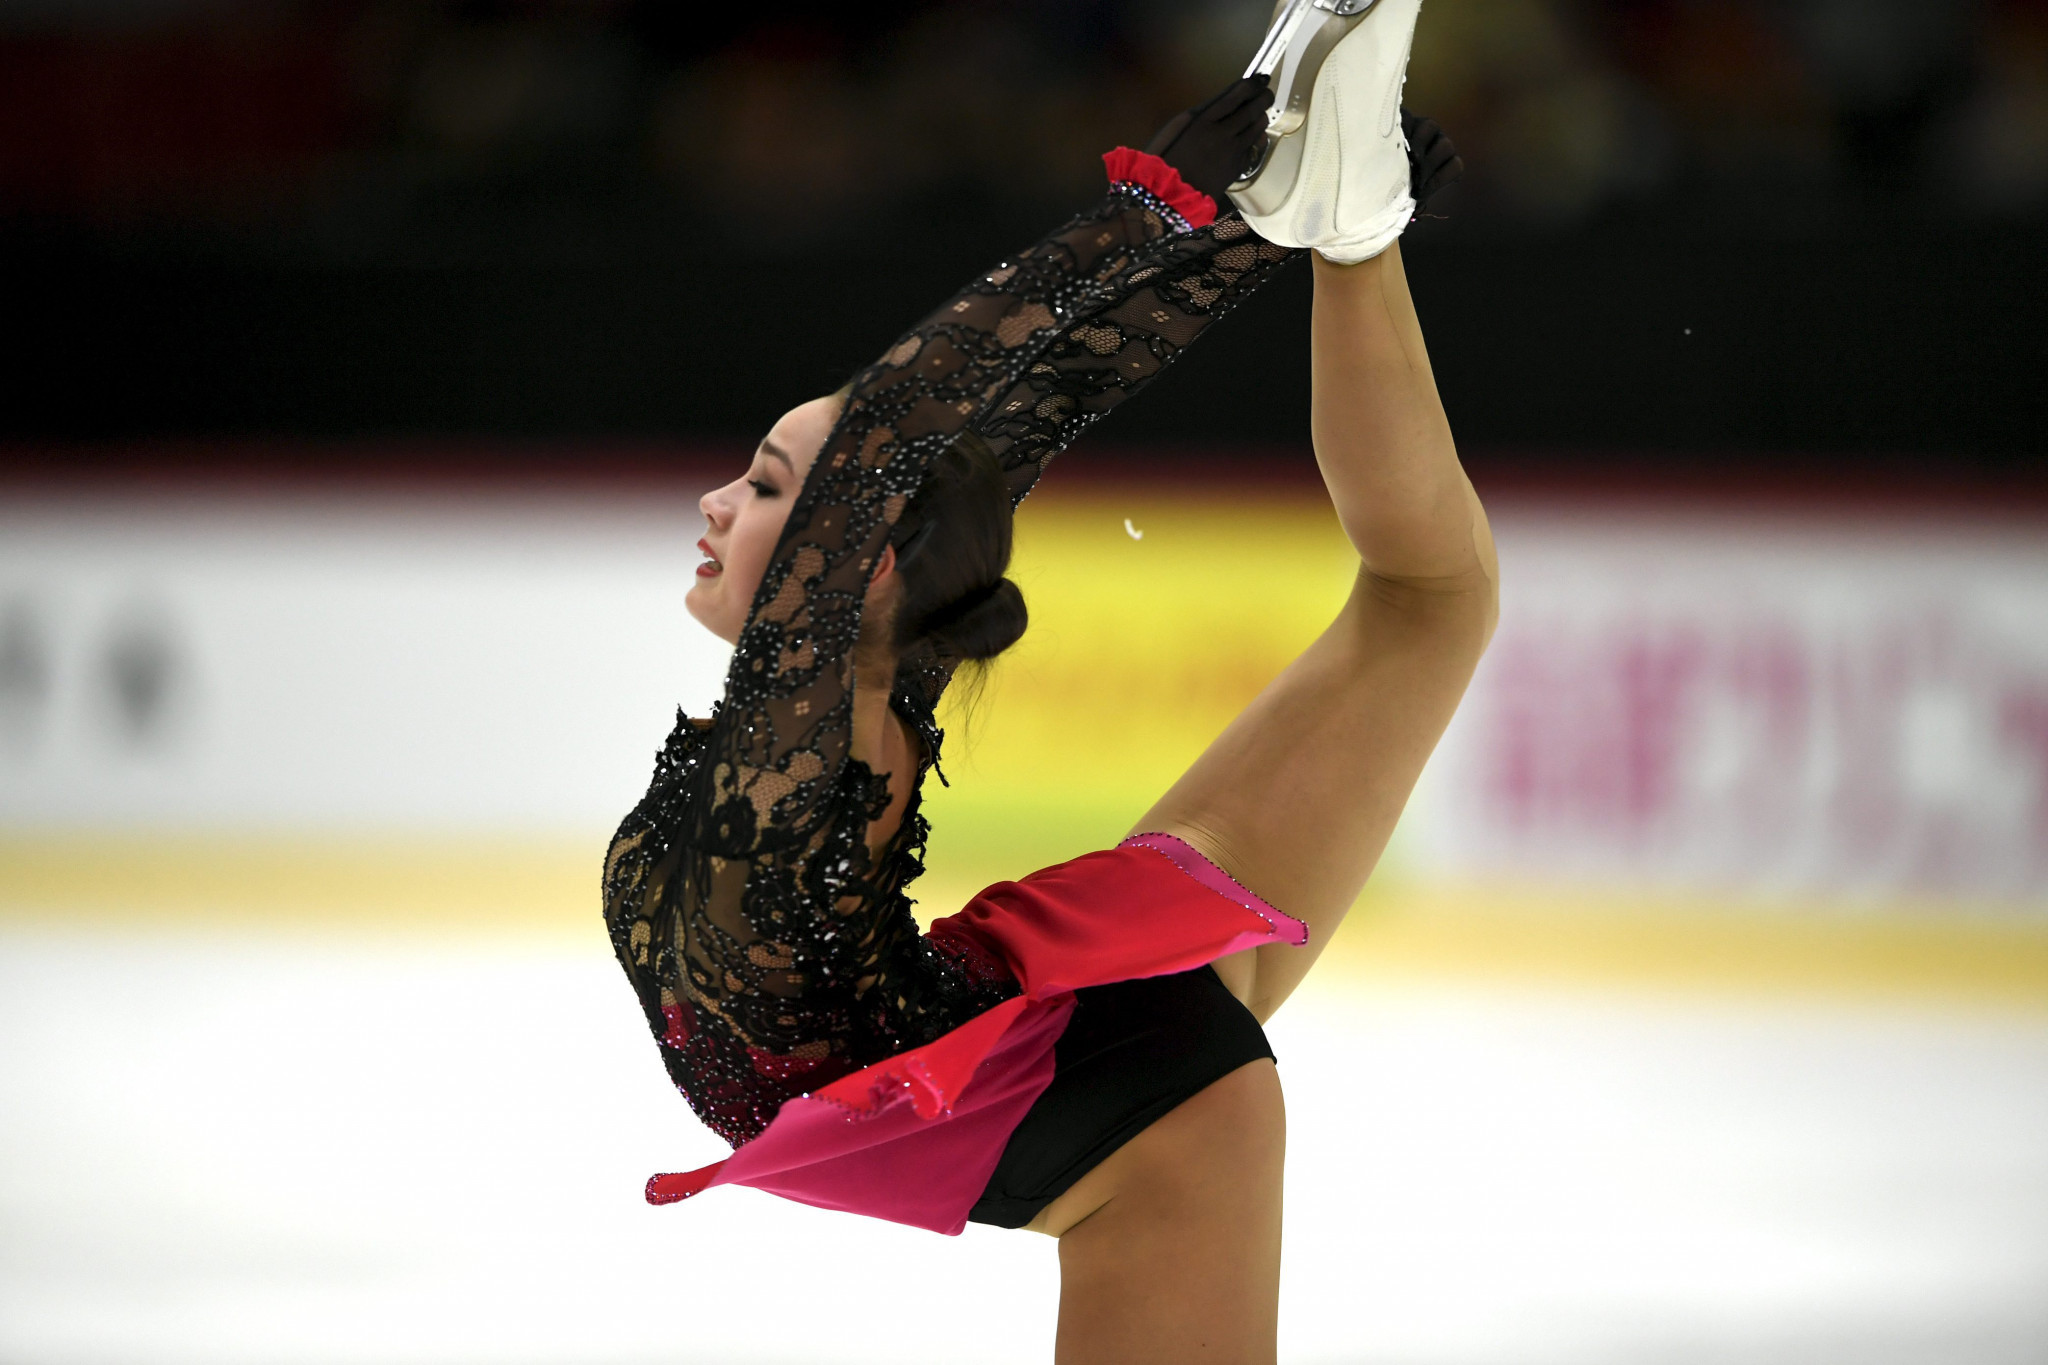 Russia's Alina Zagitova competes at her home Grand Prix after winning the Olympic gold medal at Pyeongchang 2018 ©Getty Images